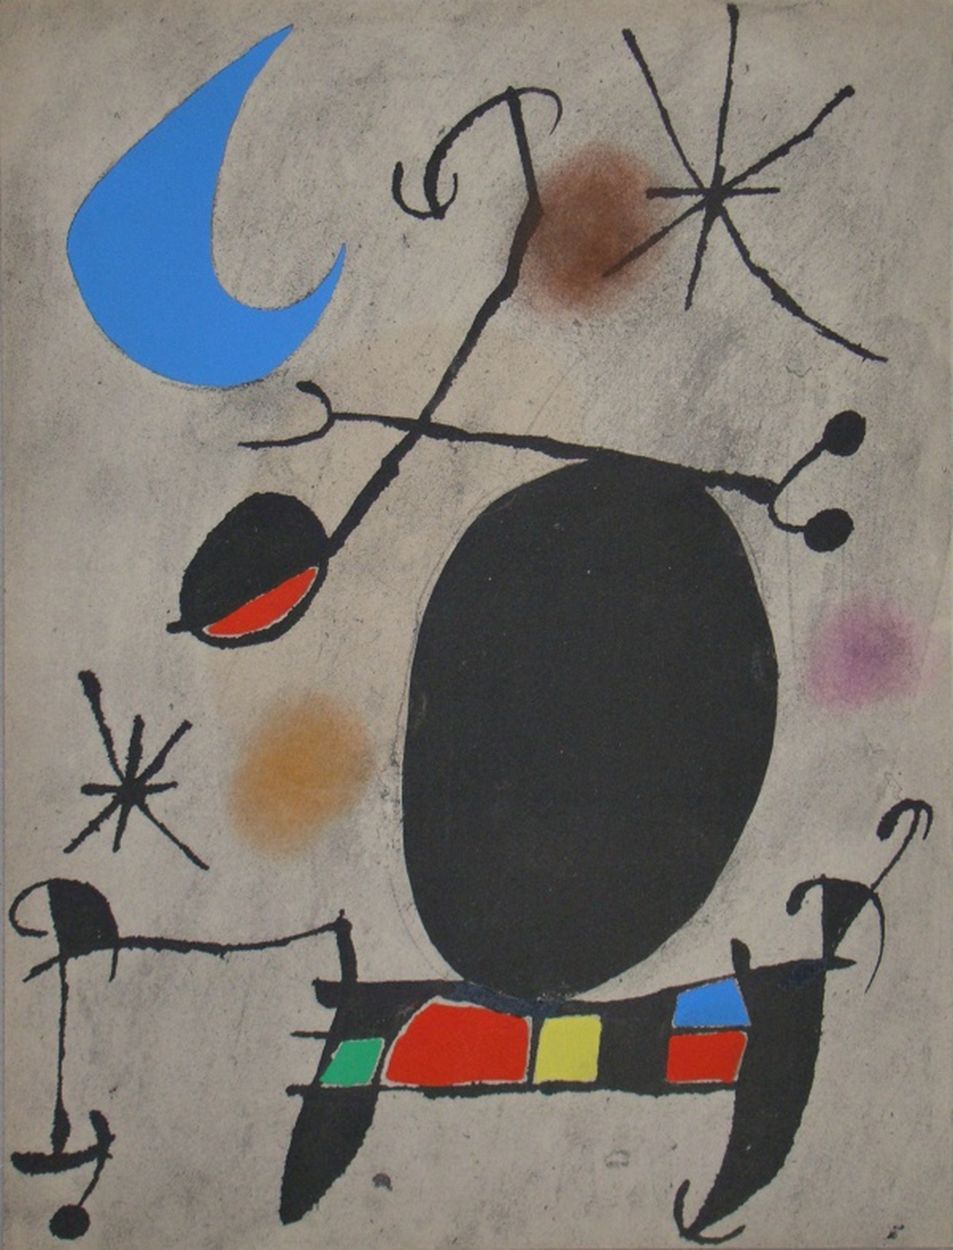 Joan MIRO (d’après) Joan MIRO (after)

Woman in the night, 1967

Lithograph with&hellip;